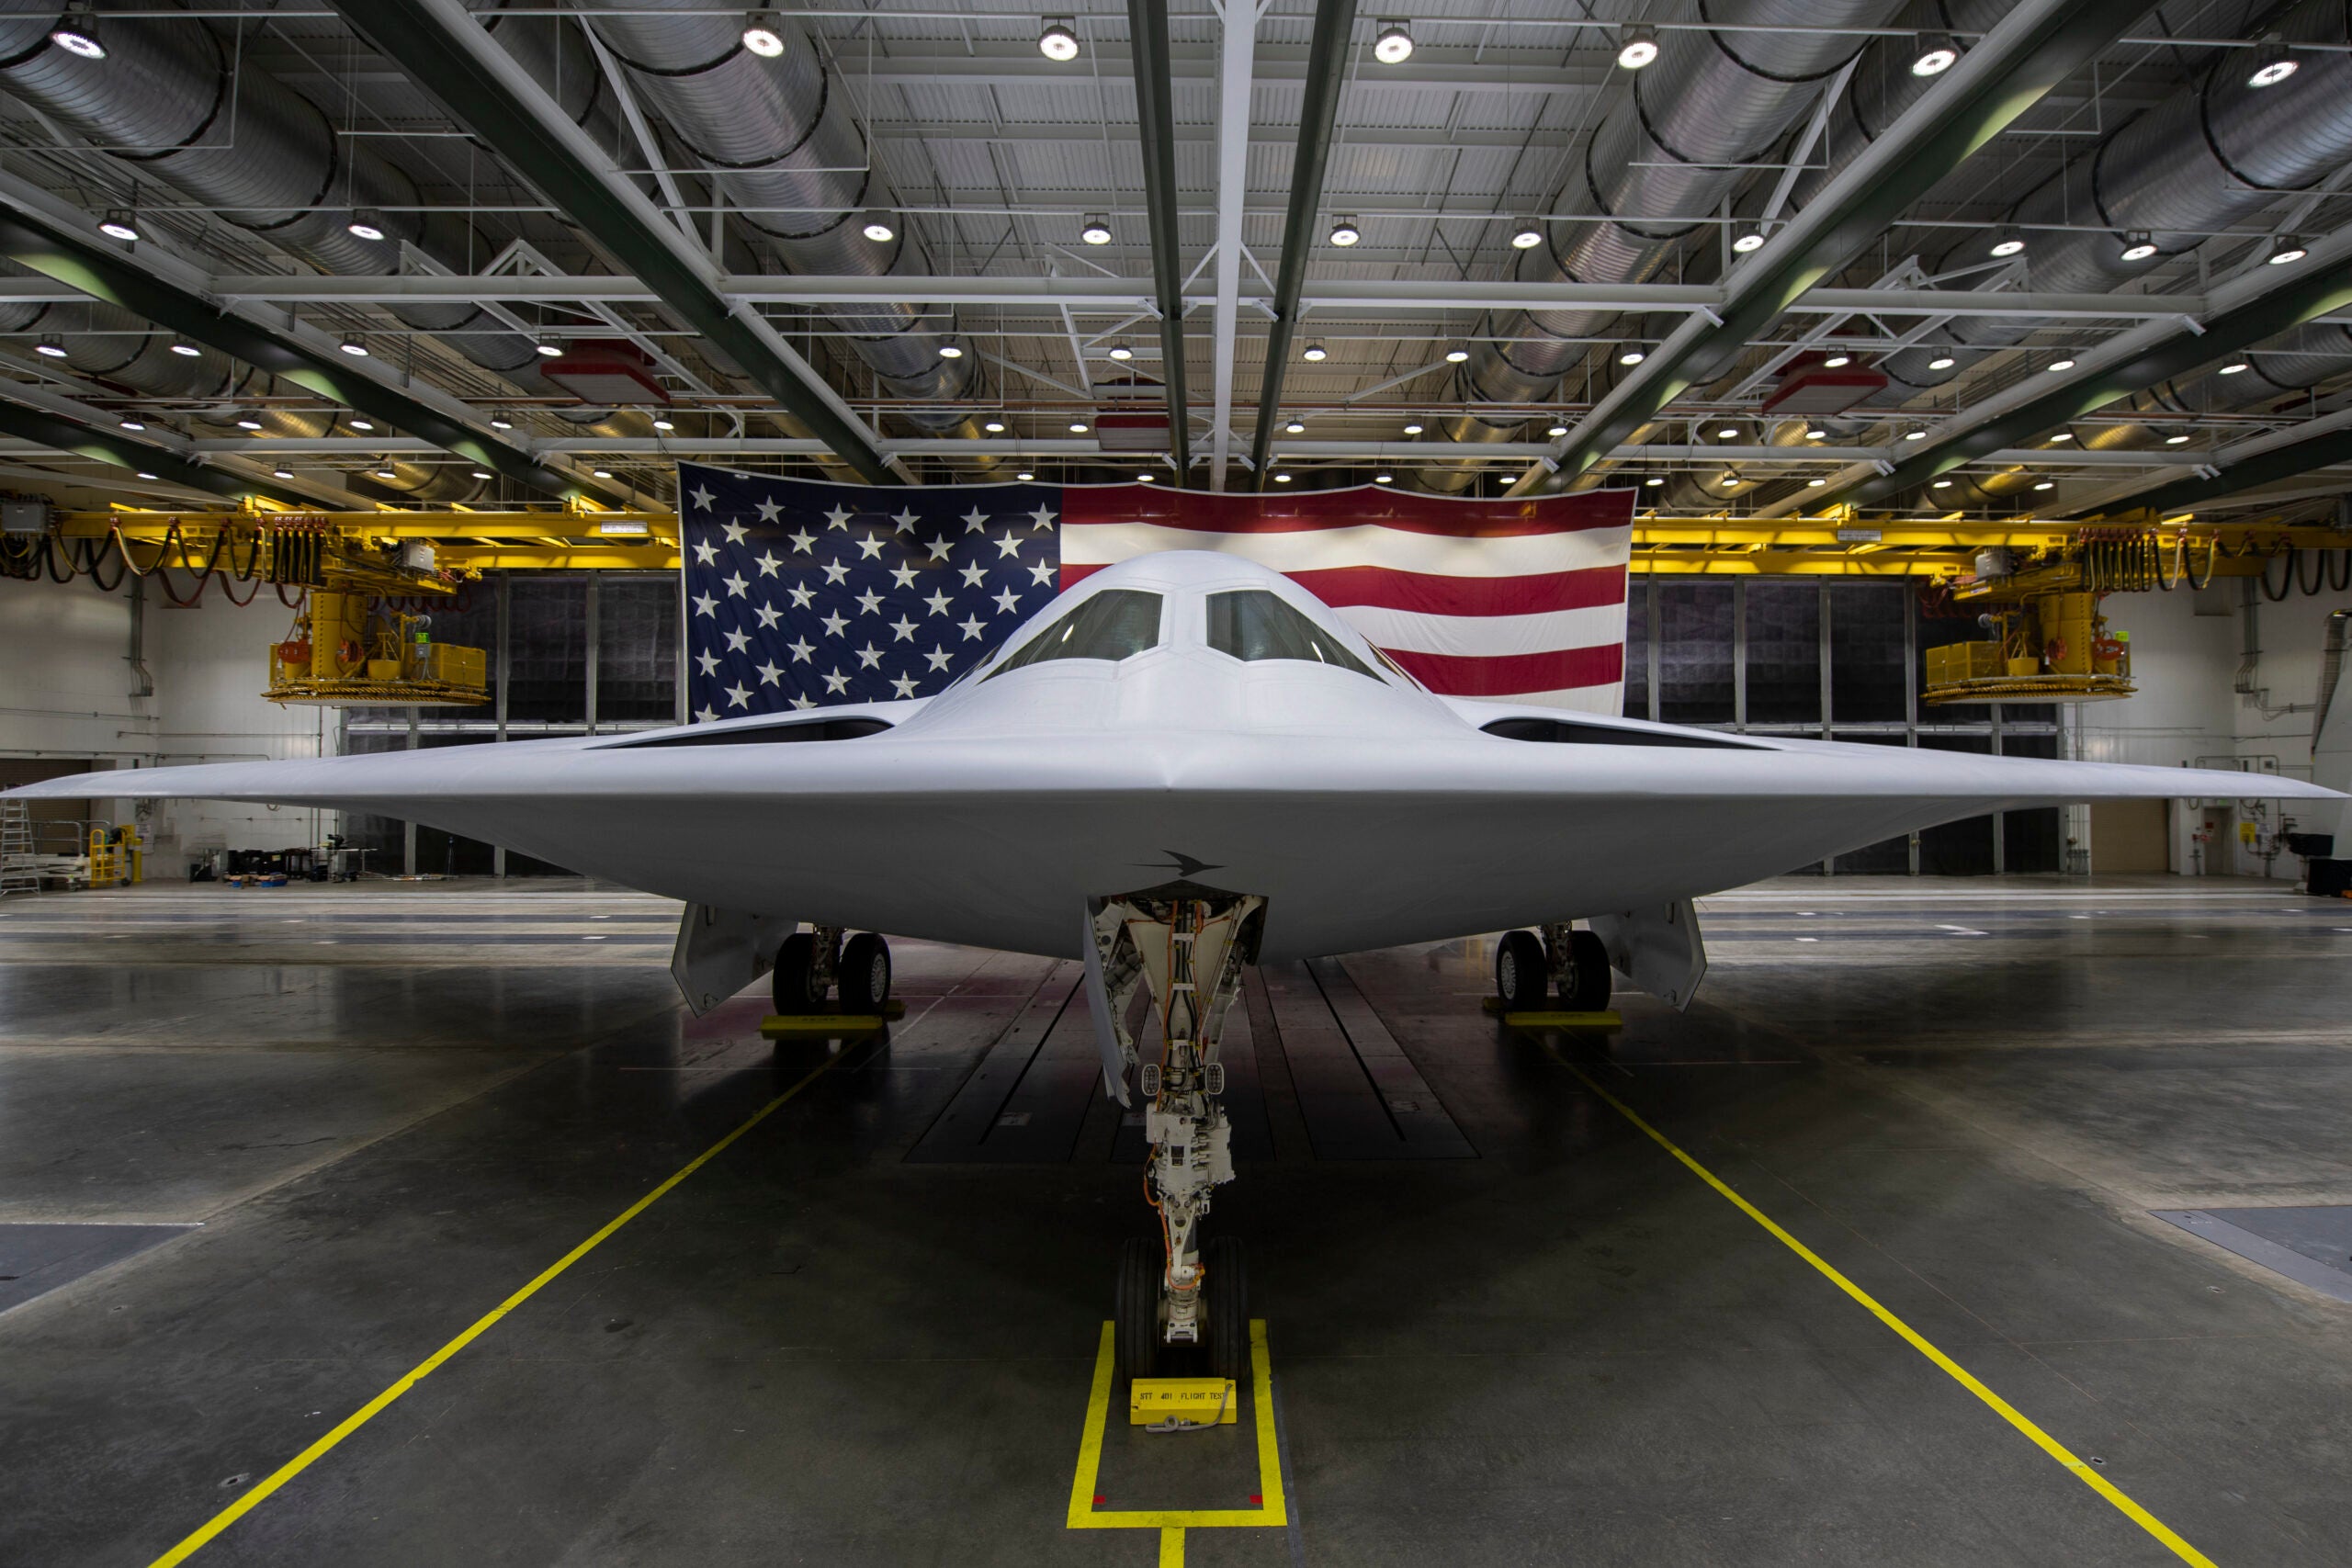 The B-21 Raider was unveiled to the public at a ceremony December 2, 2022 in

Palmdale, Calif. Designed to operate in tomorrow's high-end threat environment, the B-21 will play a critical role in ensuring America's enduring airpower capability. (U.S. Air Force photo)